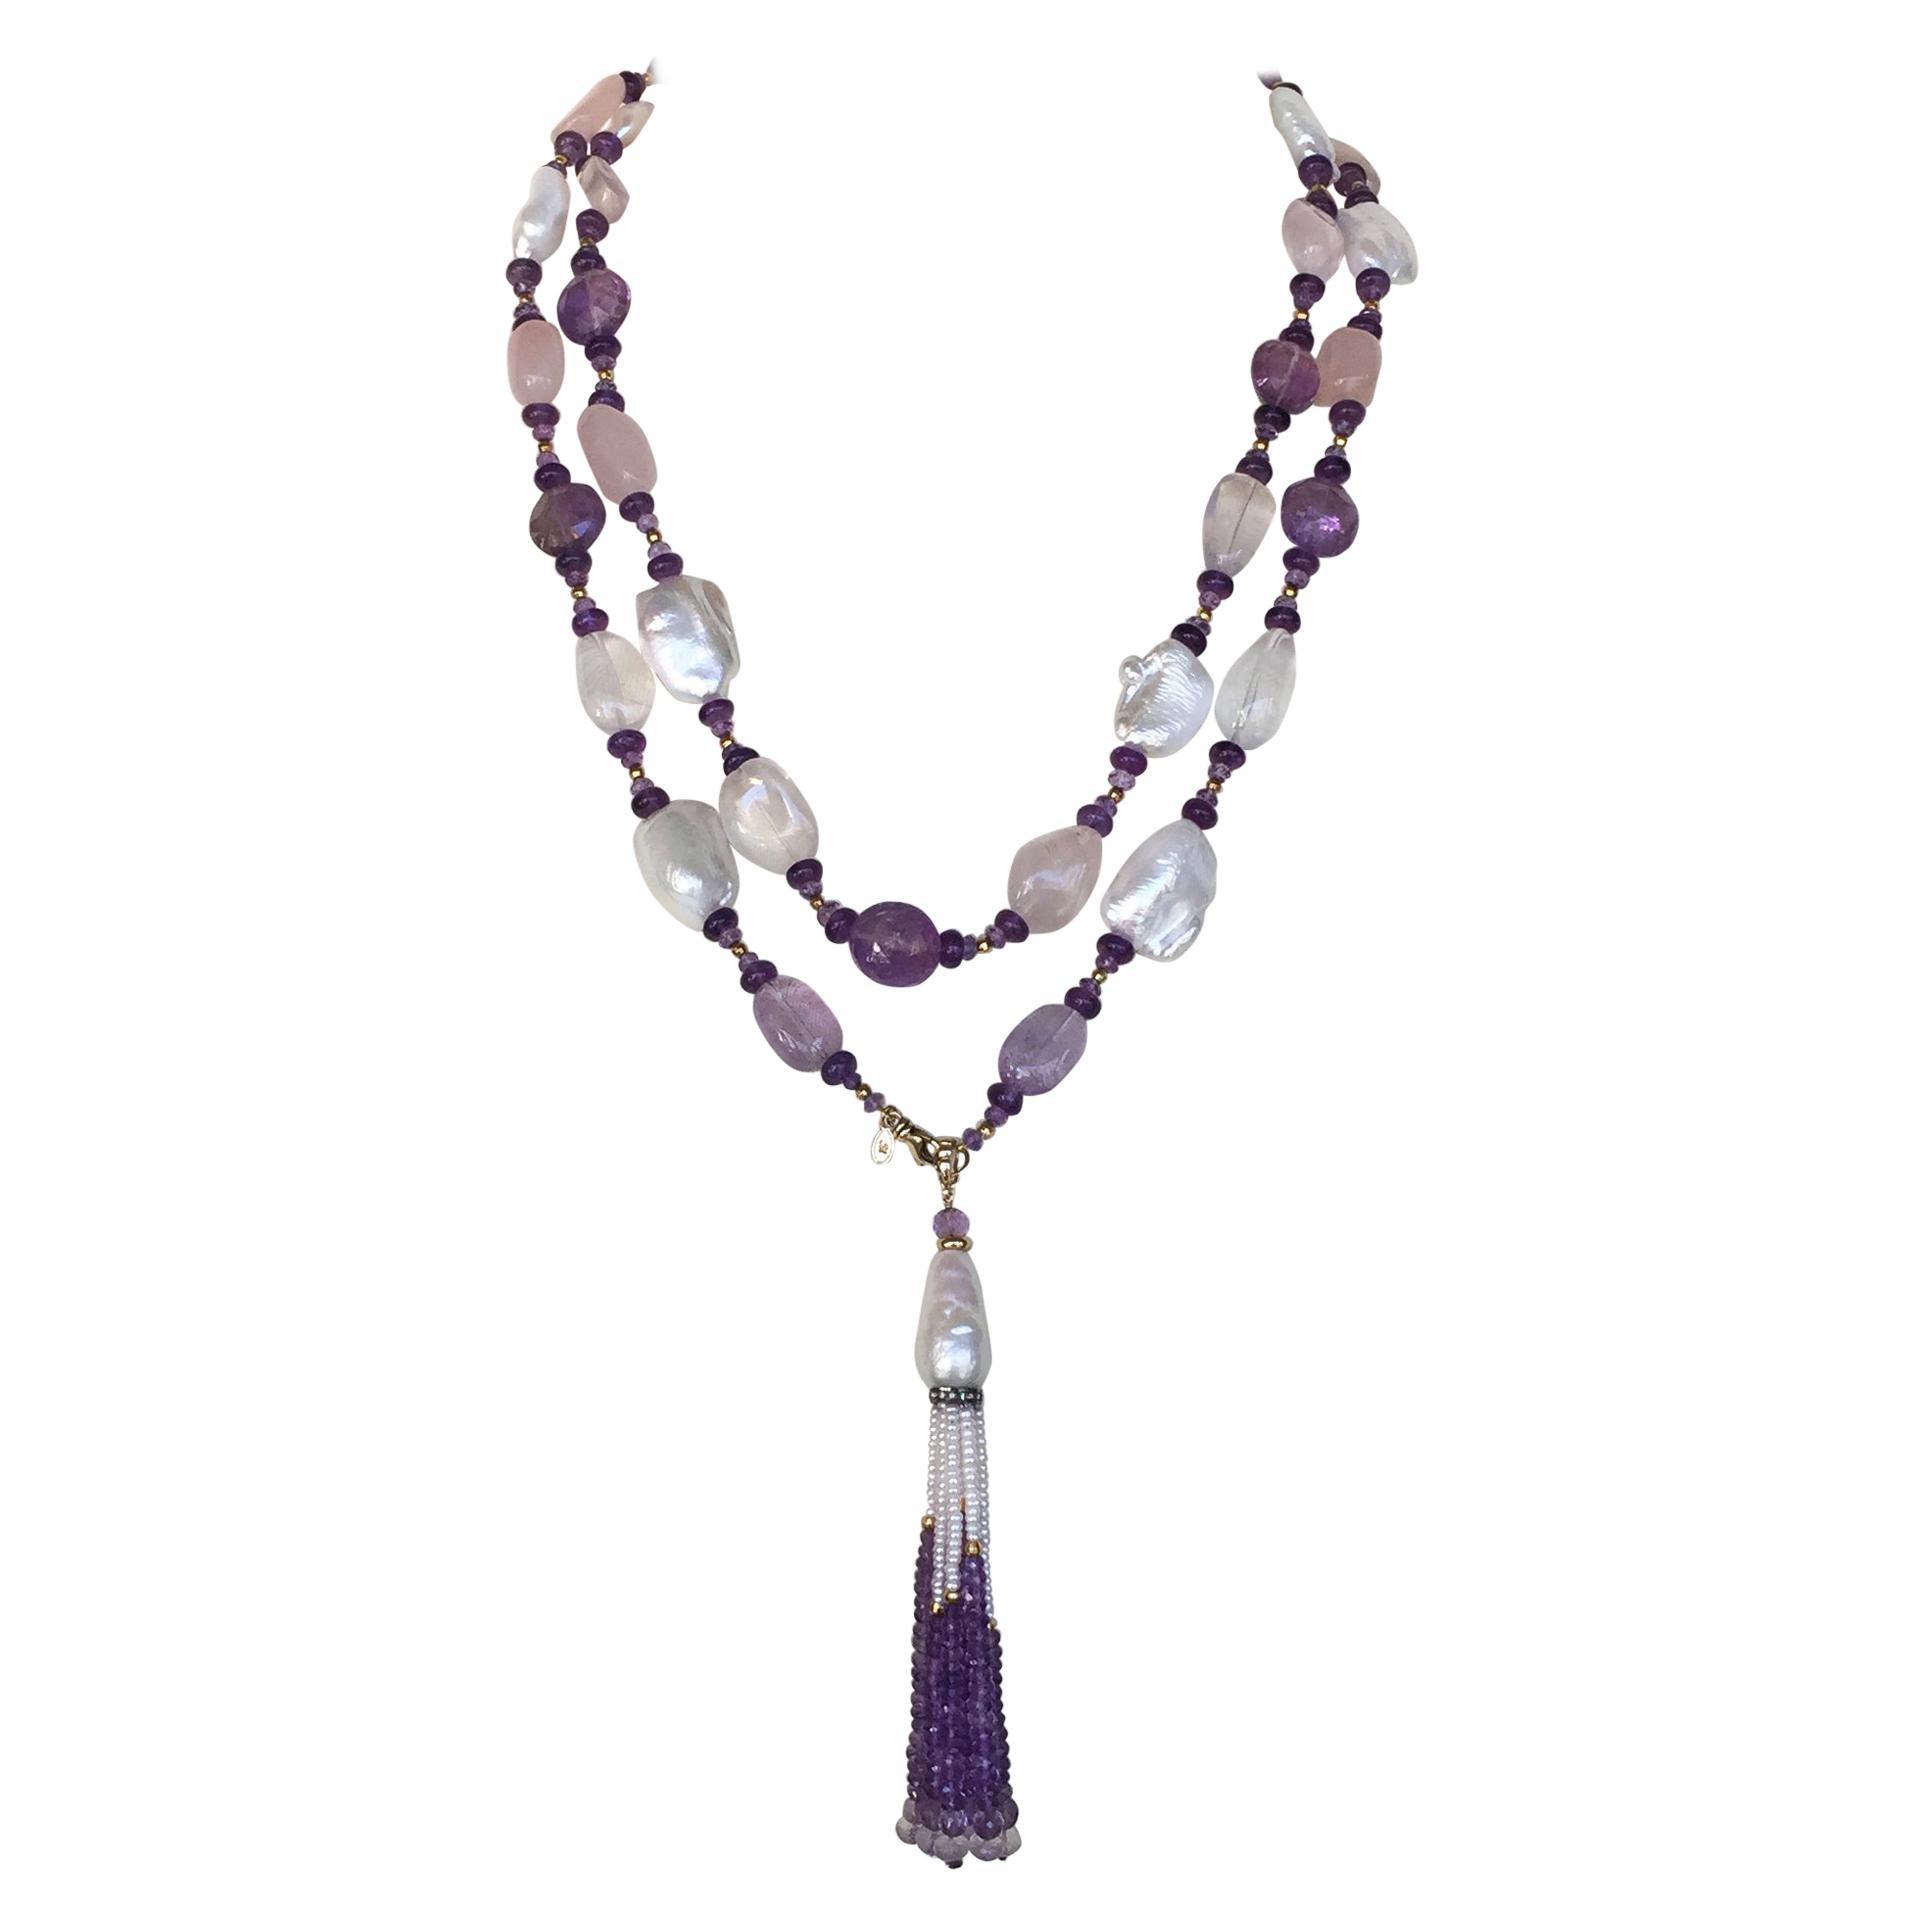 Marina J Long Pearl and Amethyst Sautoir Necklace with Tassel and Yellow Gold